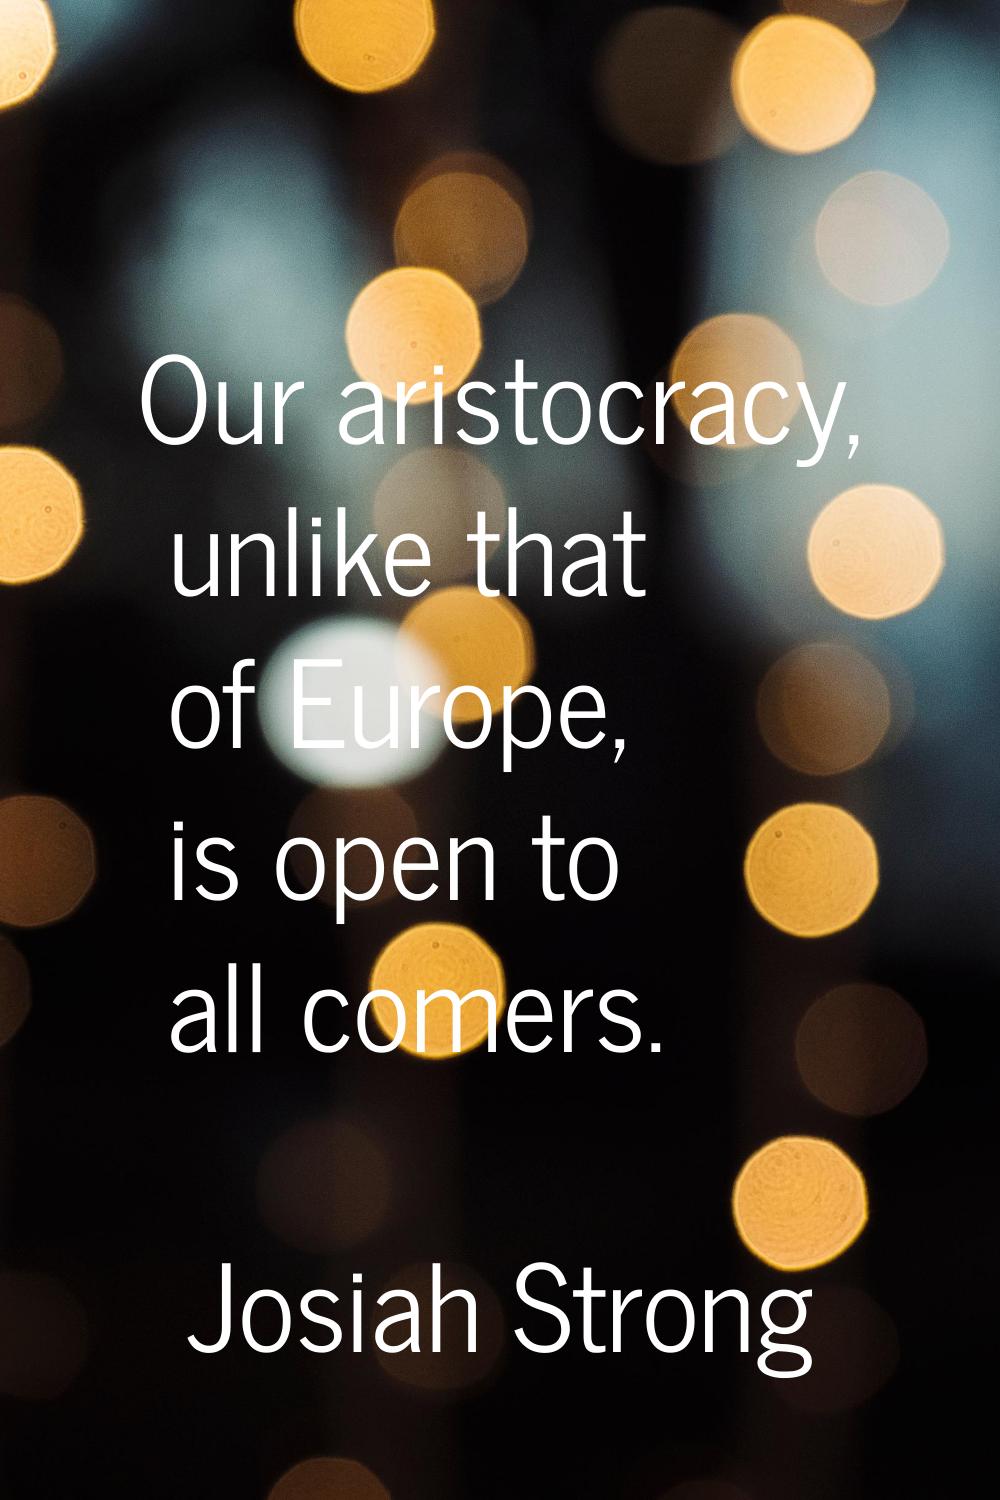 Our aristocracy, unlike that of Europe, is open to all comers.